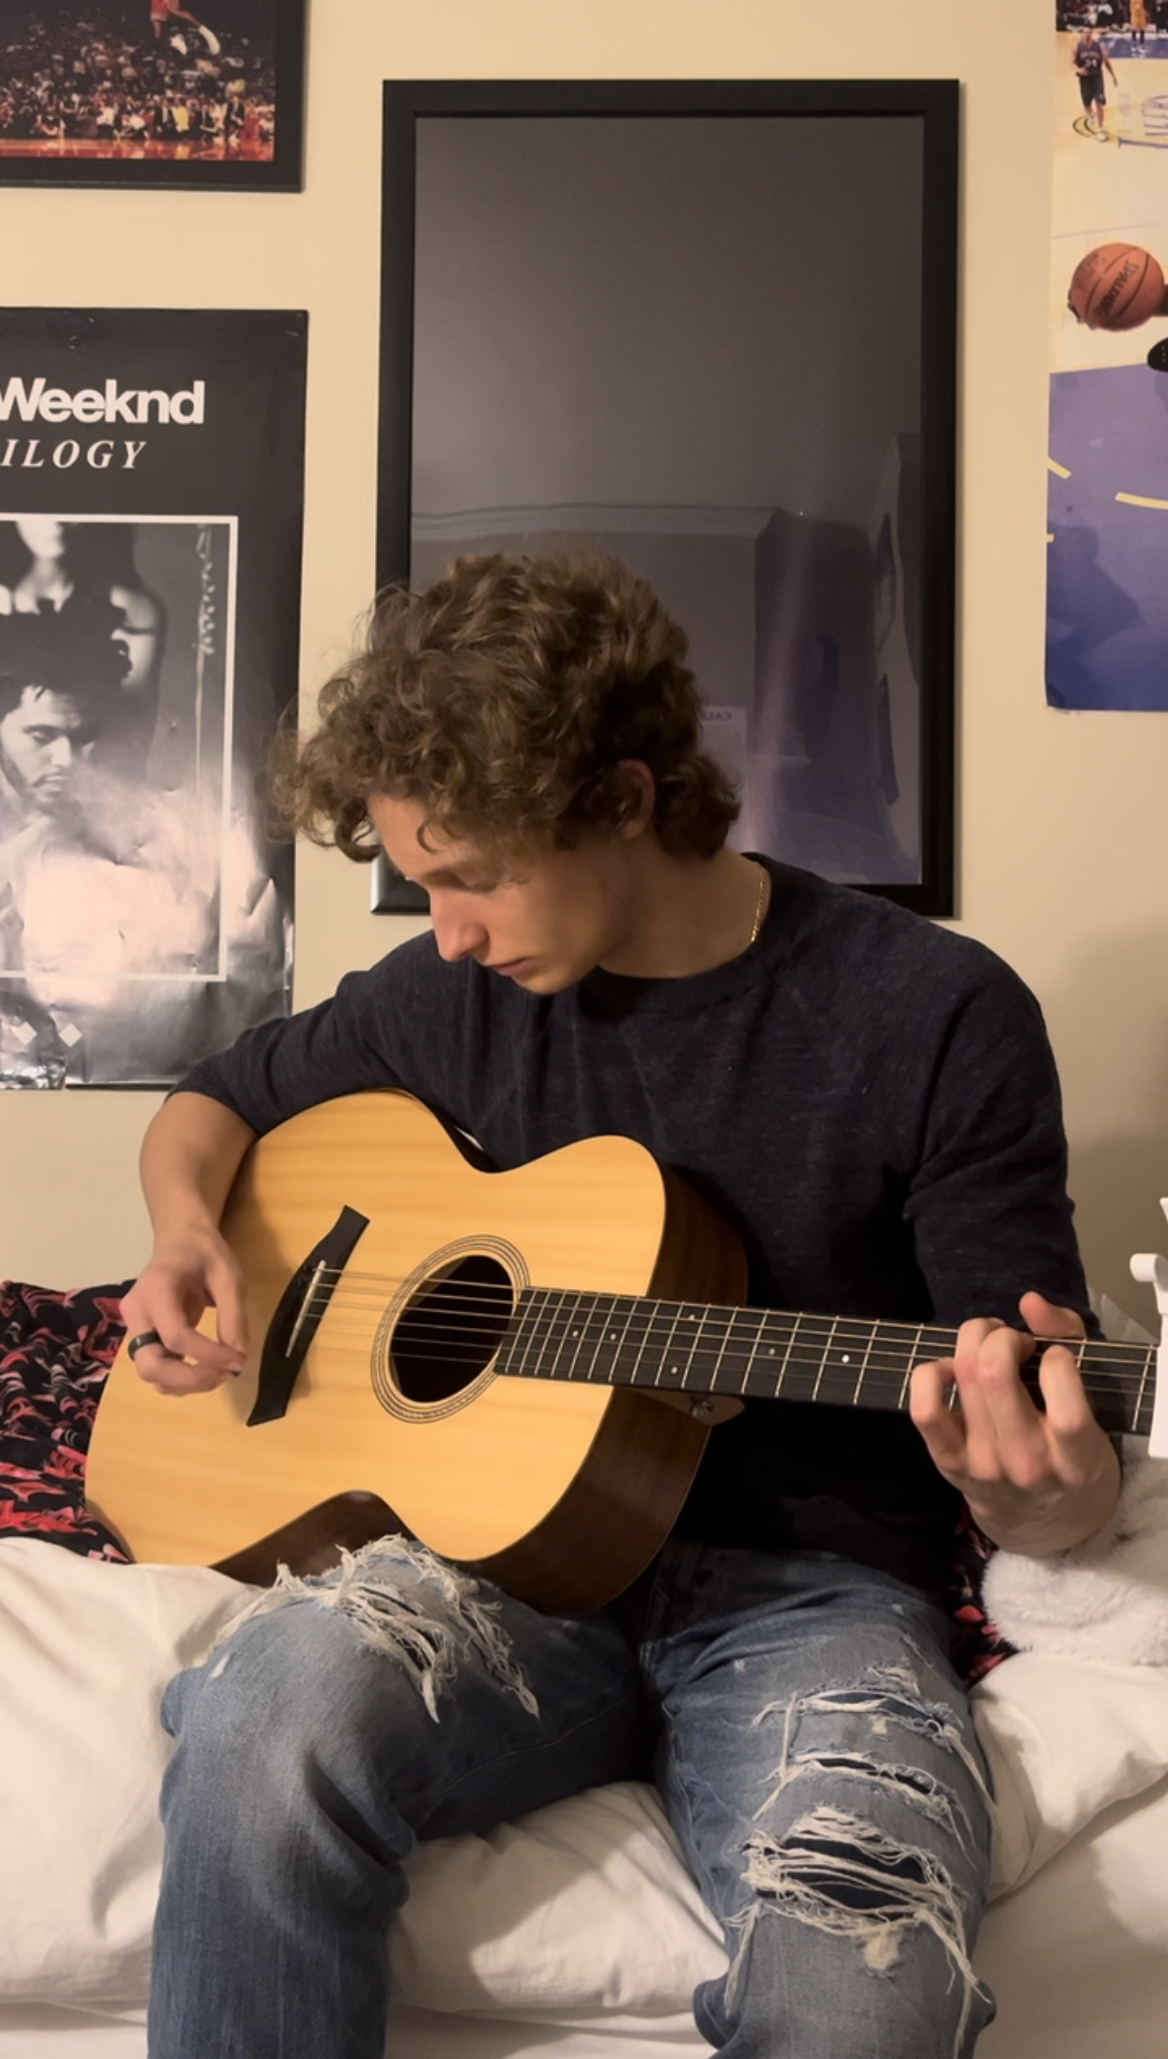 The author of SavaStrums (Sava), sitting in his bedroom playing the guitar. White man with dirty blond/brown hair looking down at his acoustic guitar strumming a chord. The guitar is a light-coloured wood, resting on his thigh and chest. The bedroom has many posters behind him, including one the Weeknd's trilogy album cover.